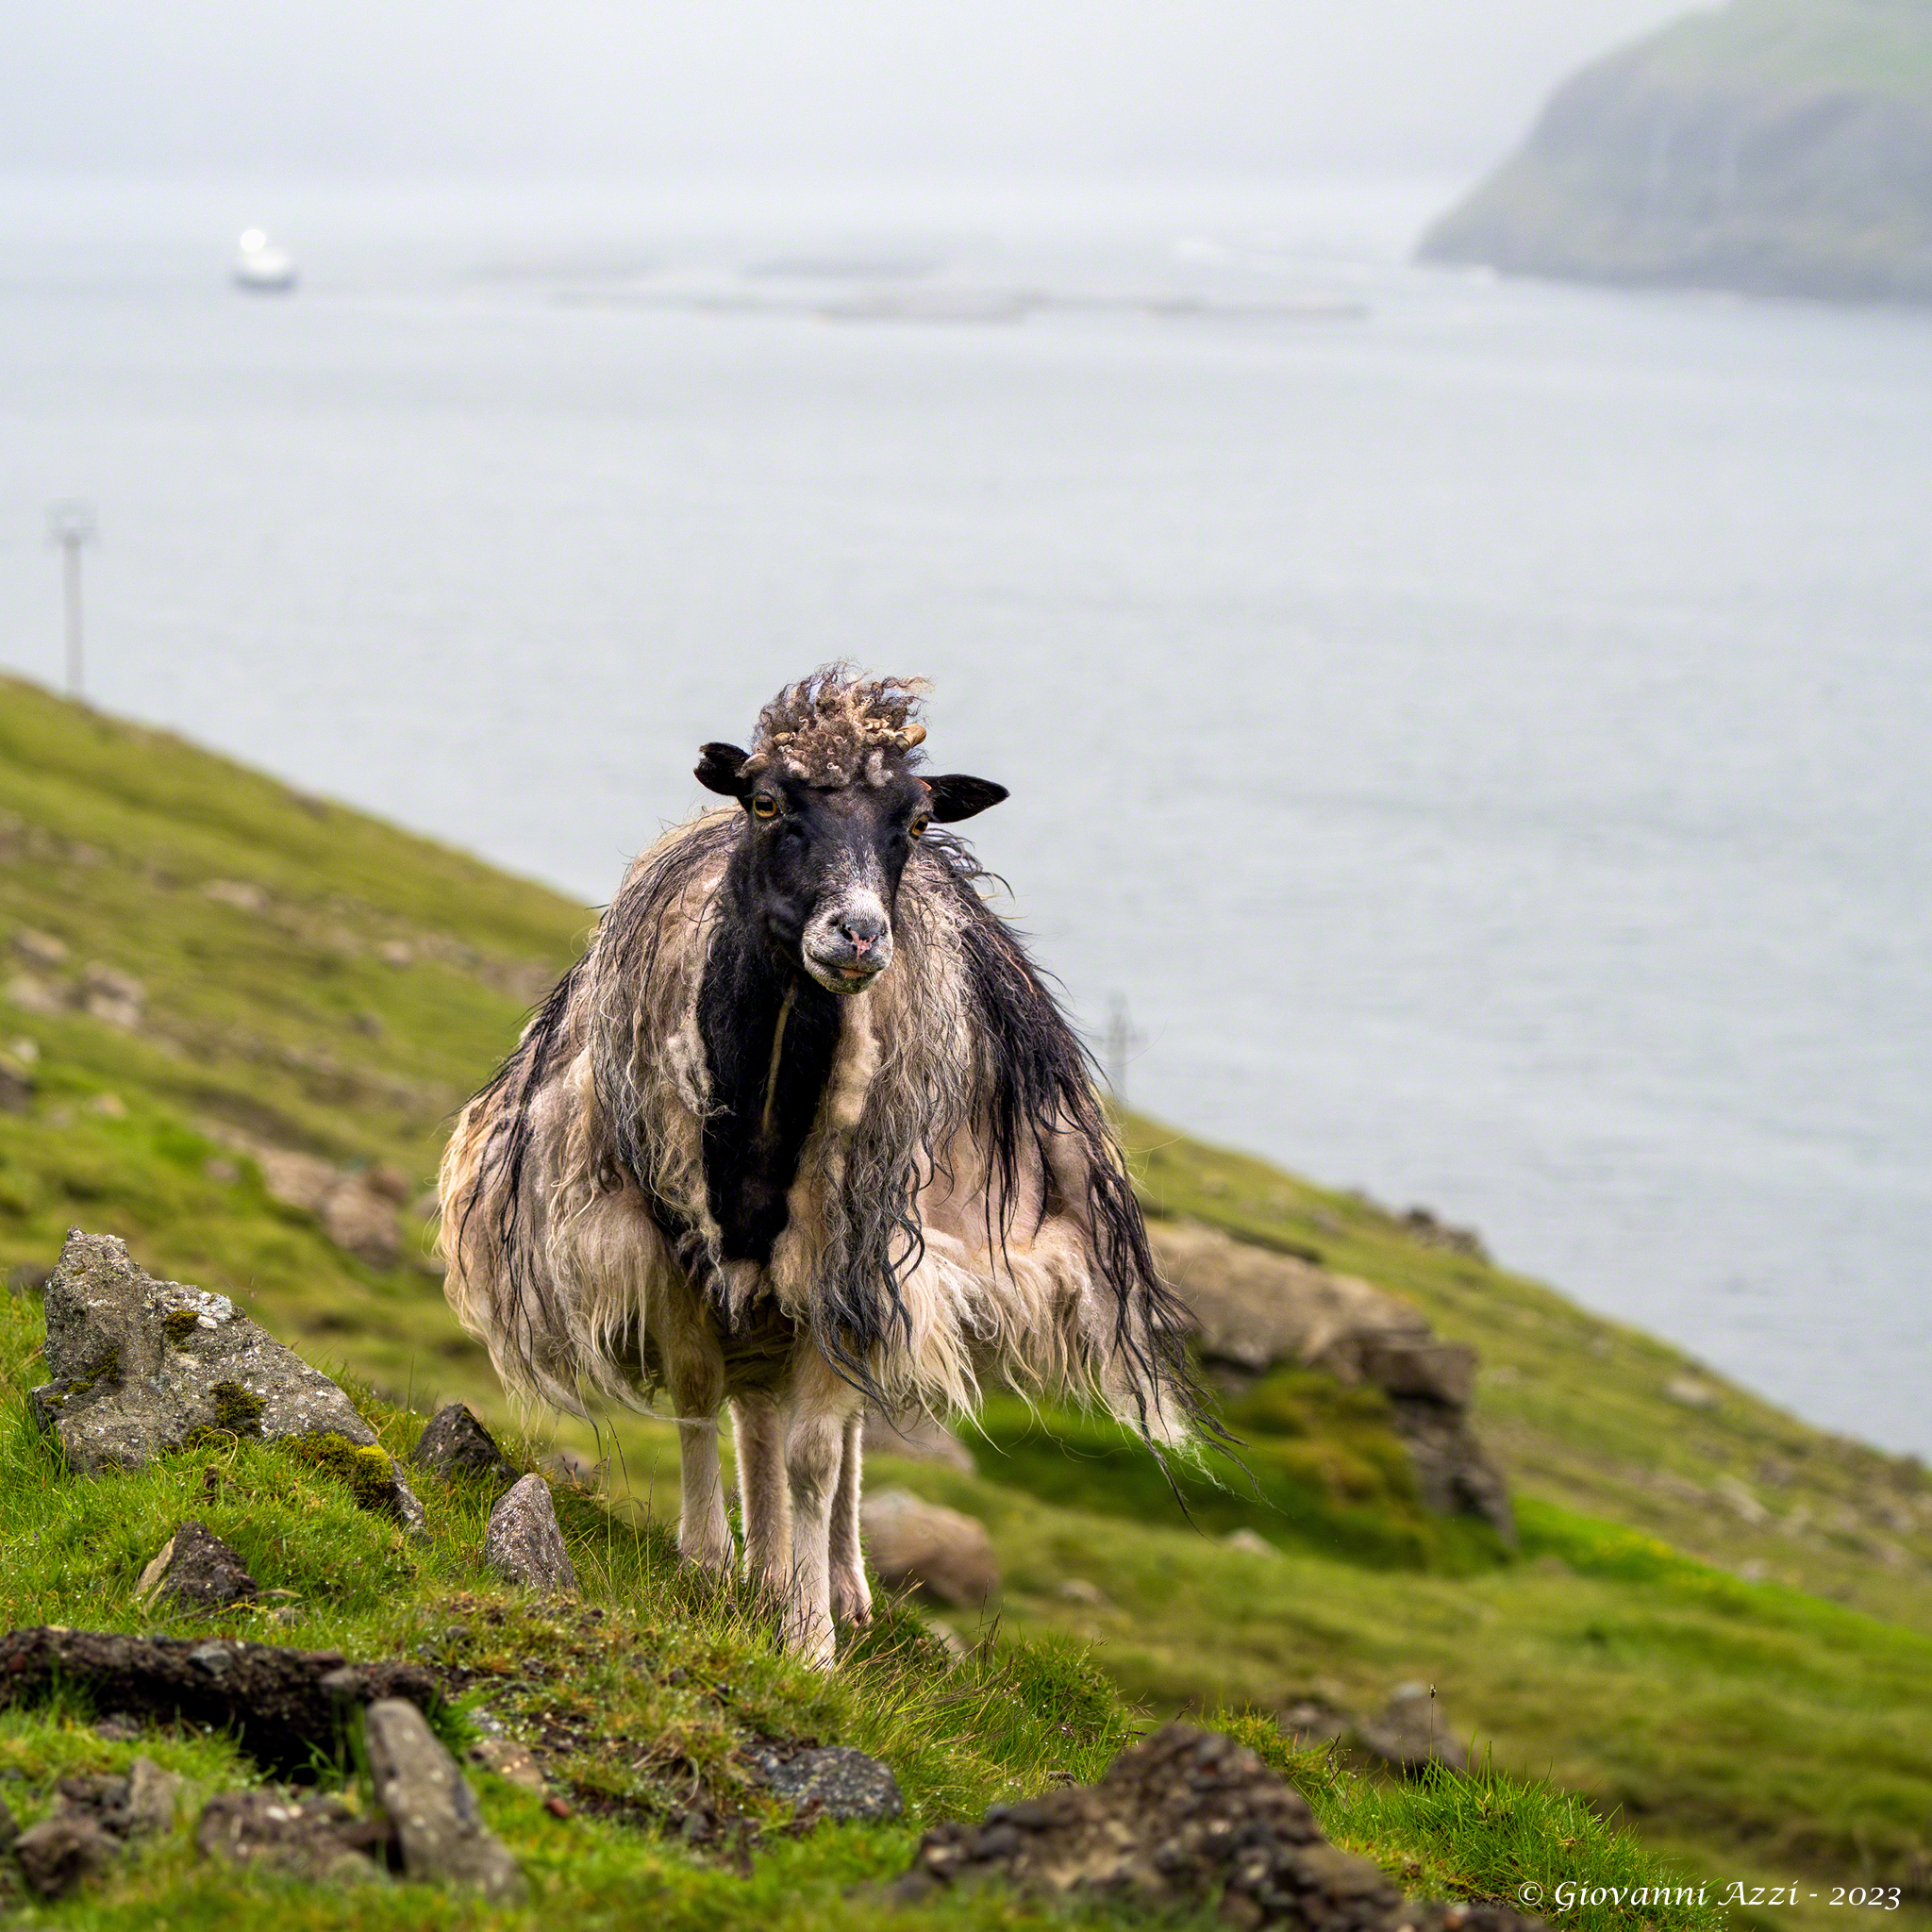 Sheep in the Faroese landscape...